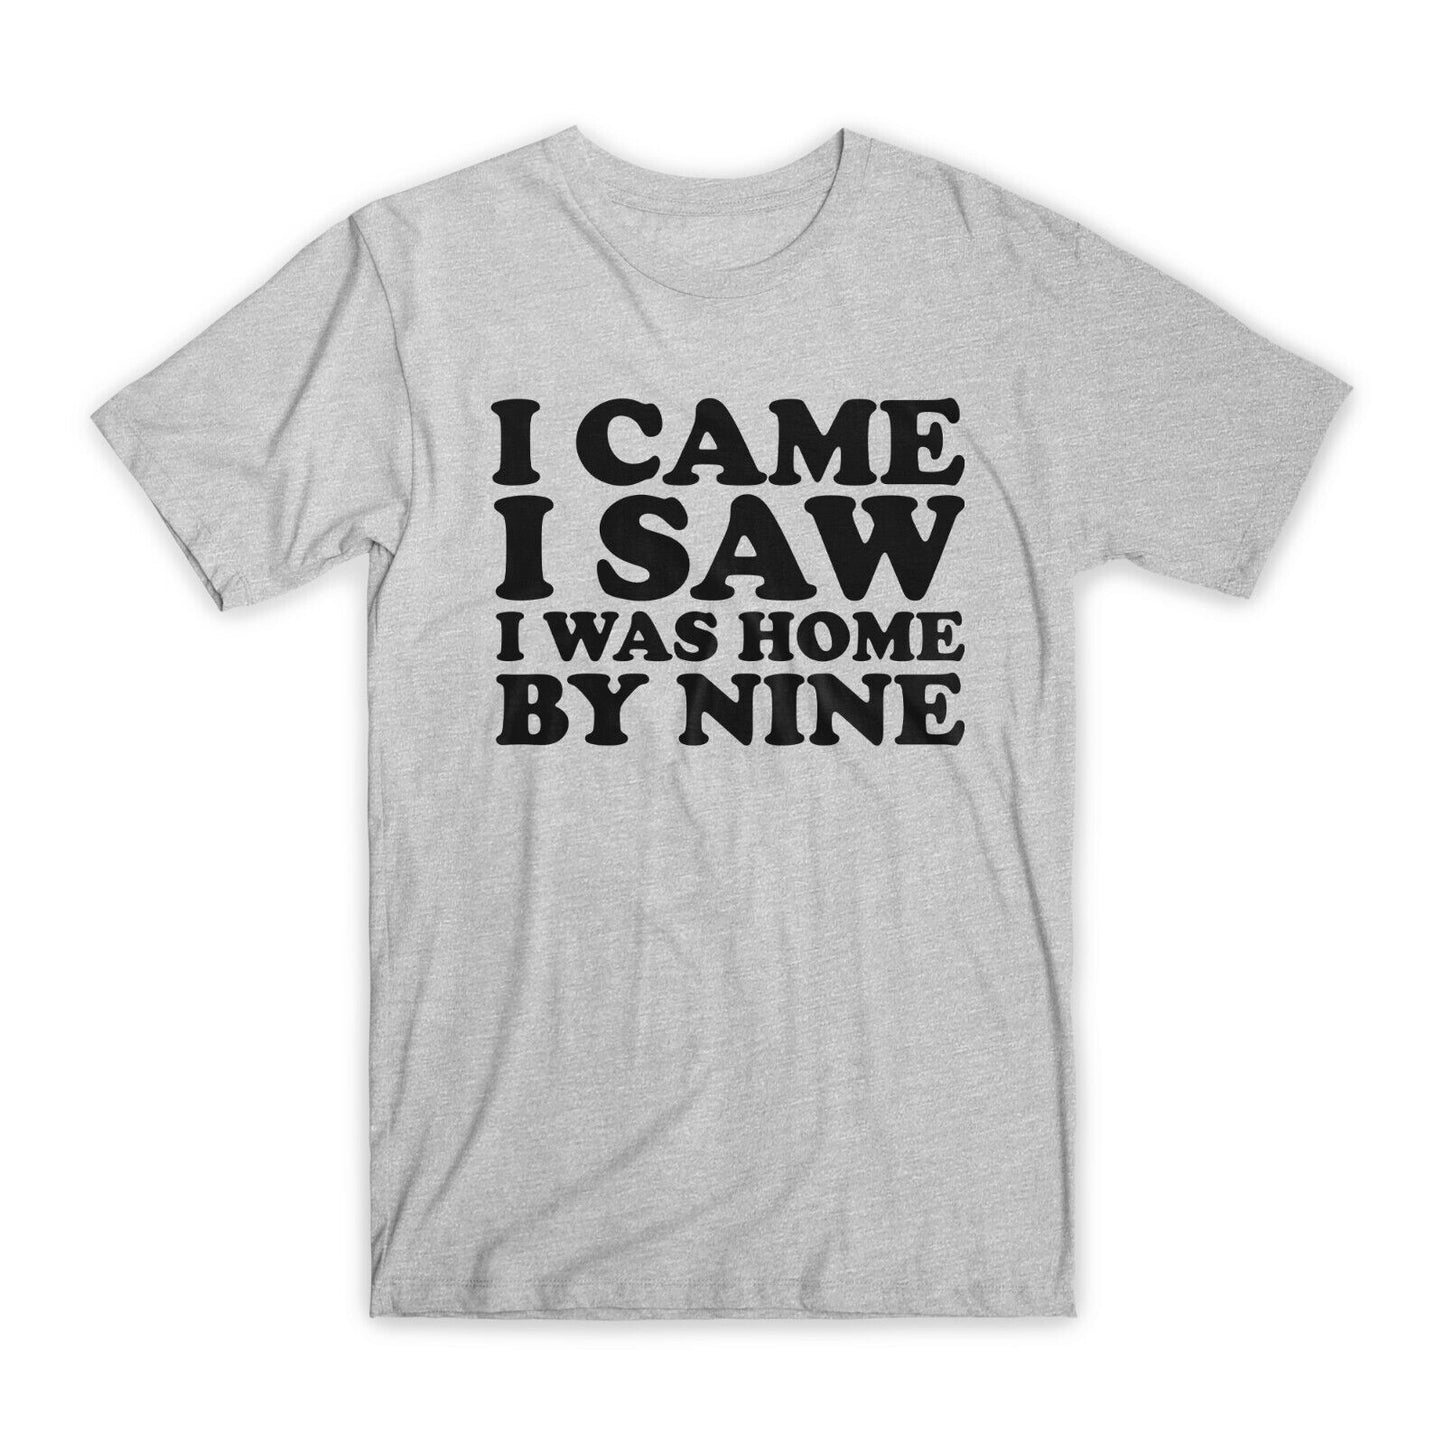 I Came I Saw I Was Home By Nine T-Shirt Premium Soft Cotton Funny Tees Gift NEW